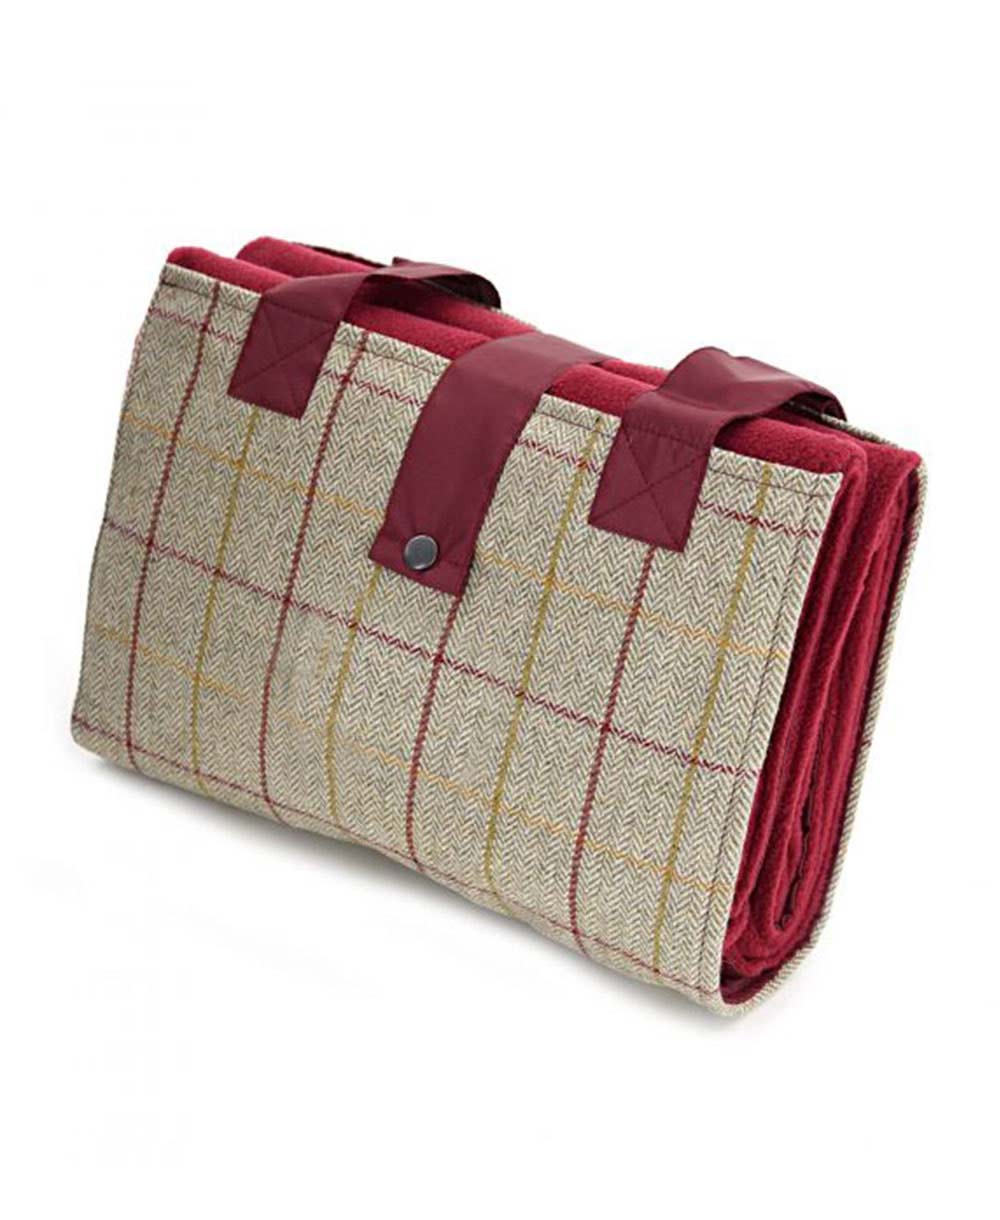 Goodwood Chequered Travel Picnic Rug in Red